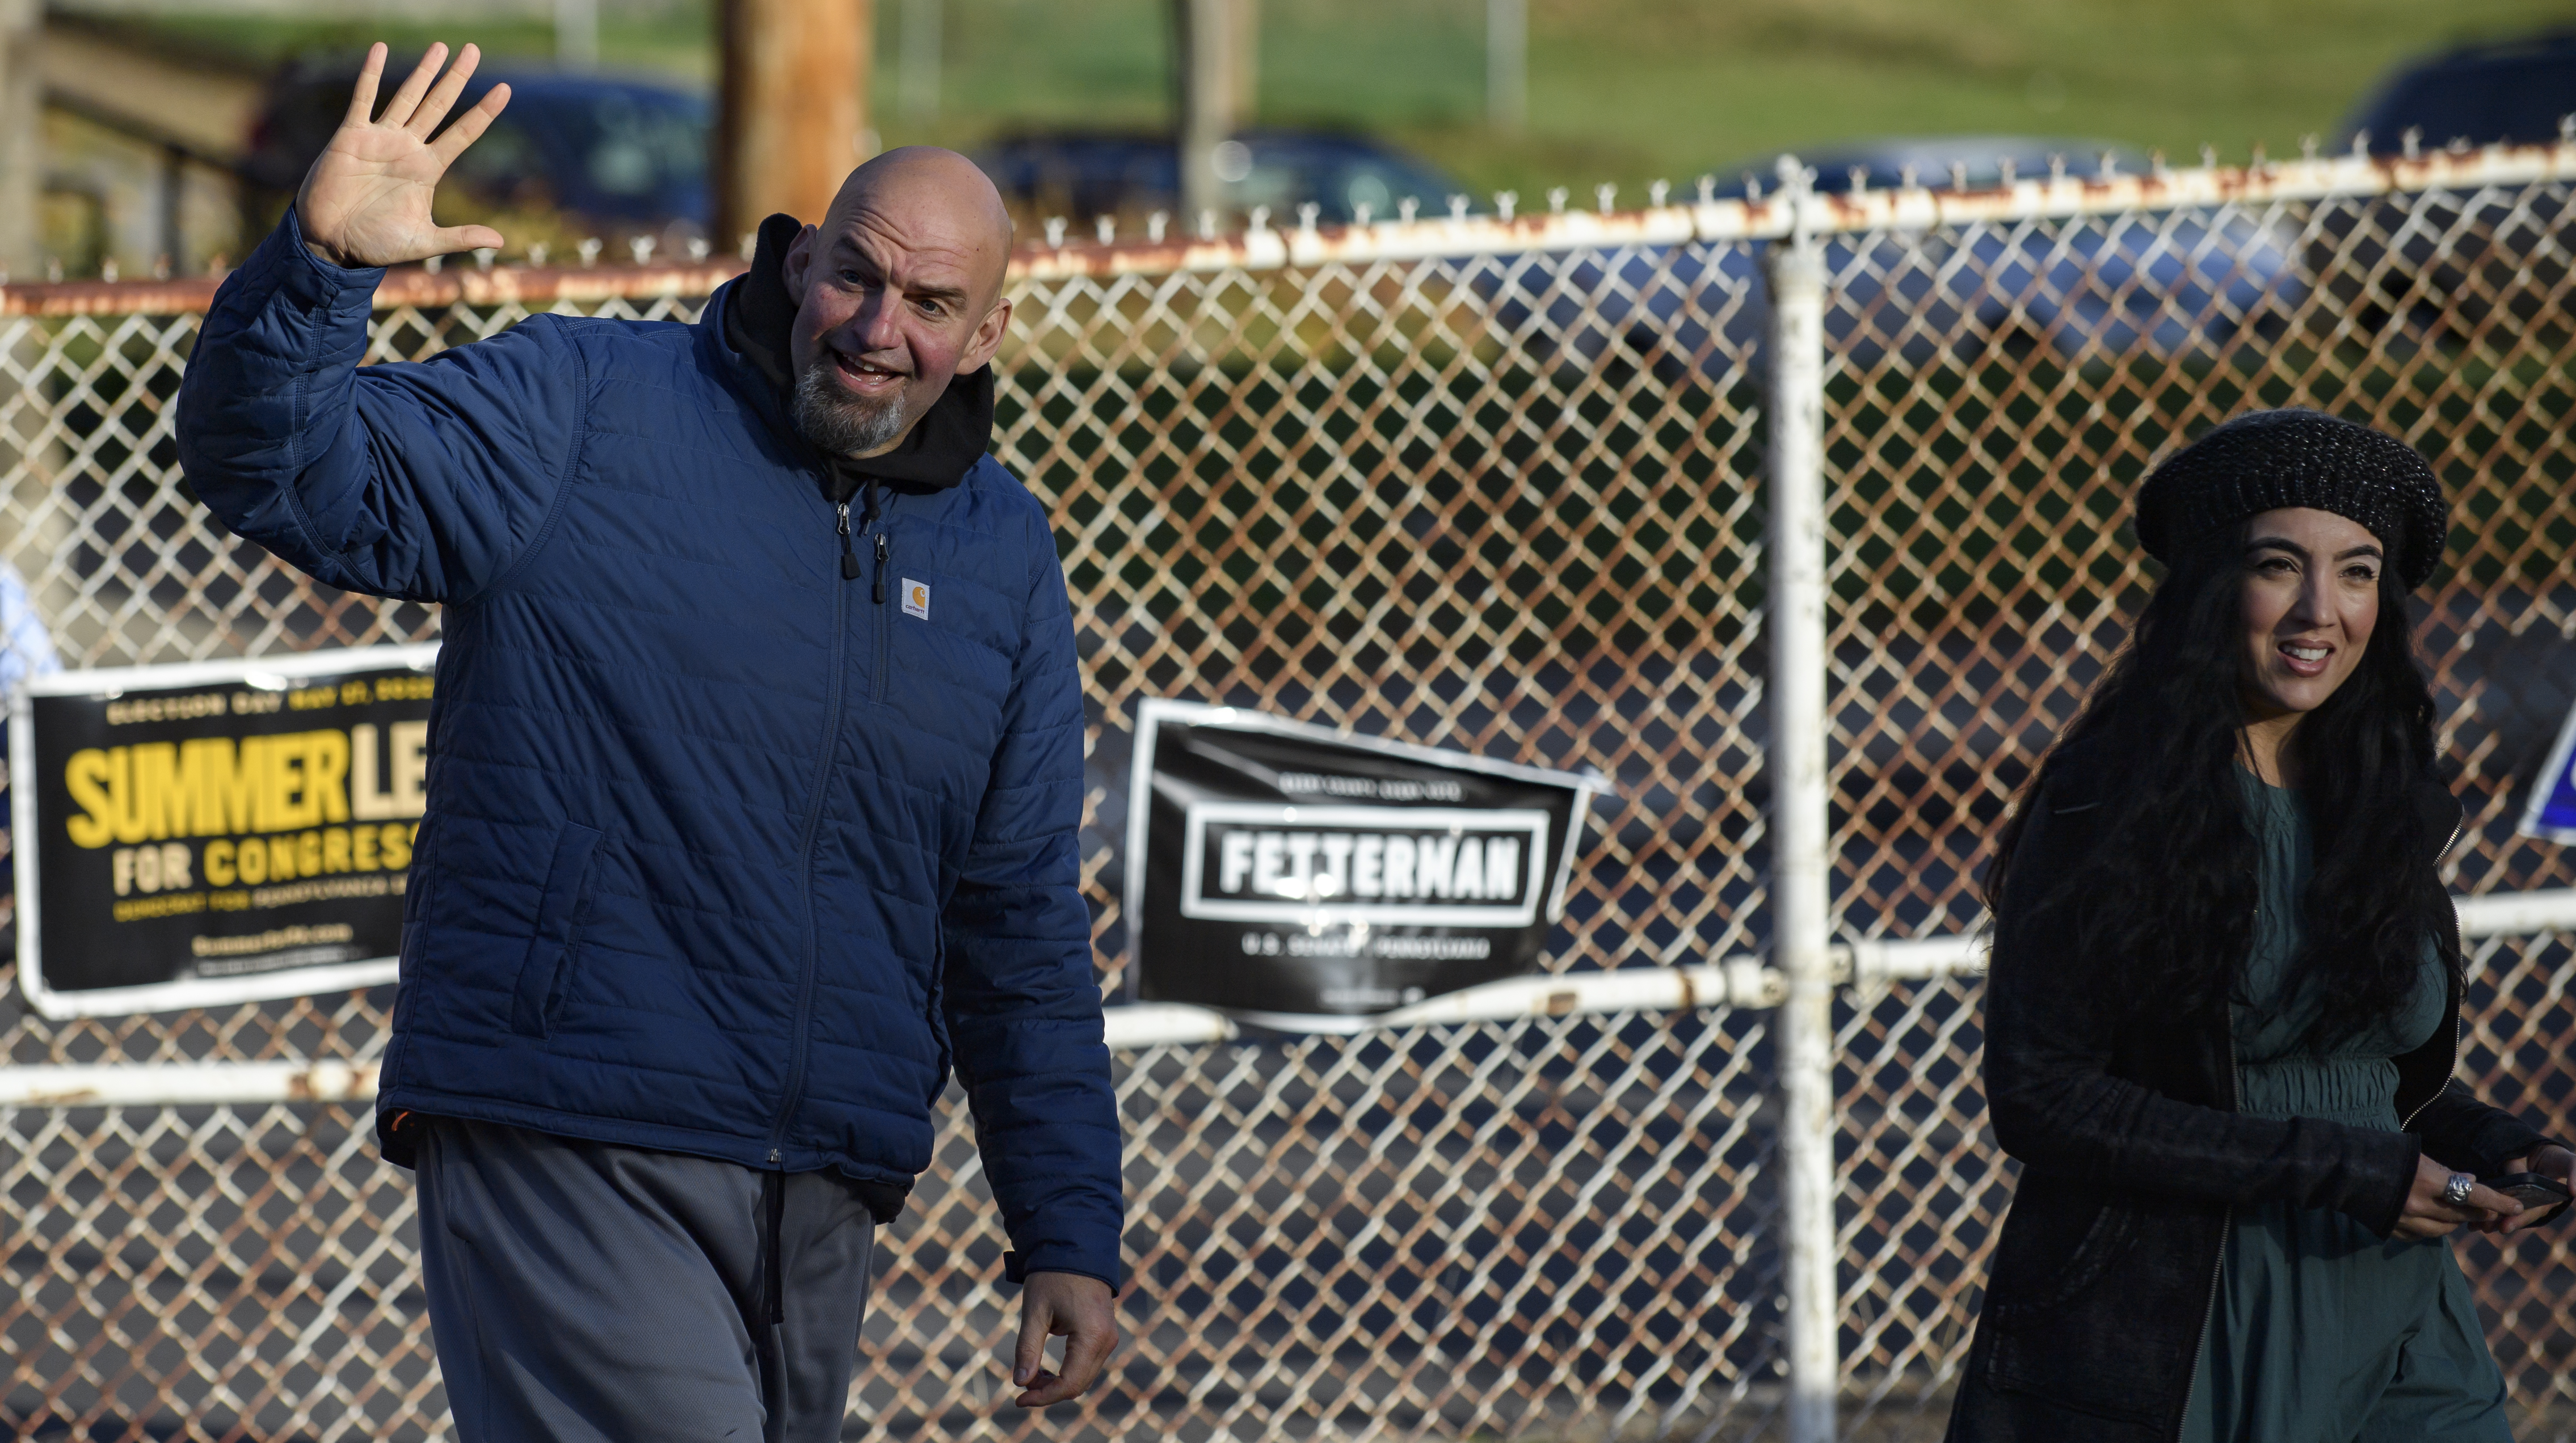 Pennsylvania Democratic Senate candidate John Fetterman and his wife, Gisele, walk into their polling place to cast their votes at the New Hope Baptist Church on November 8, 2022 in Braddock, Pennsylvania.